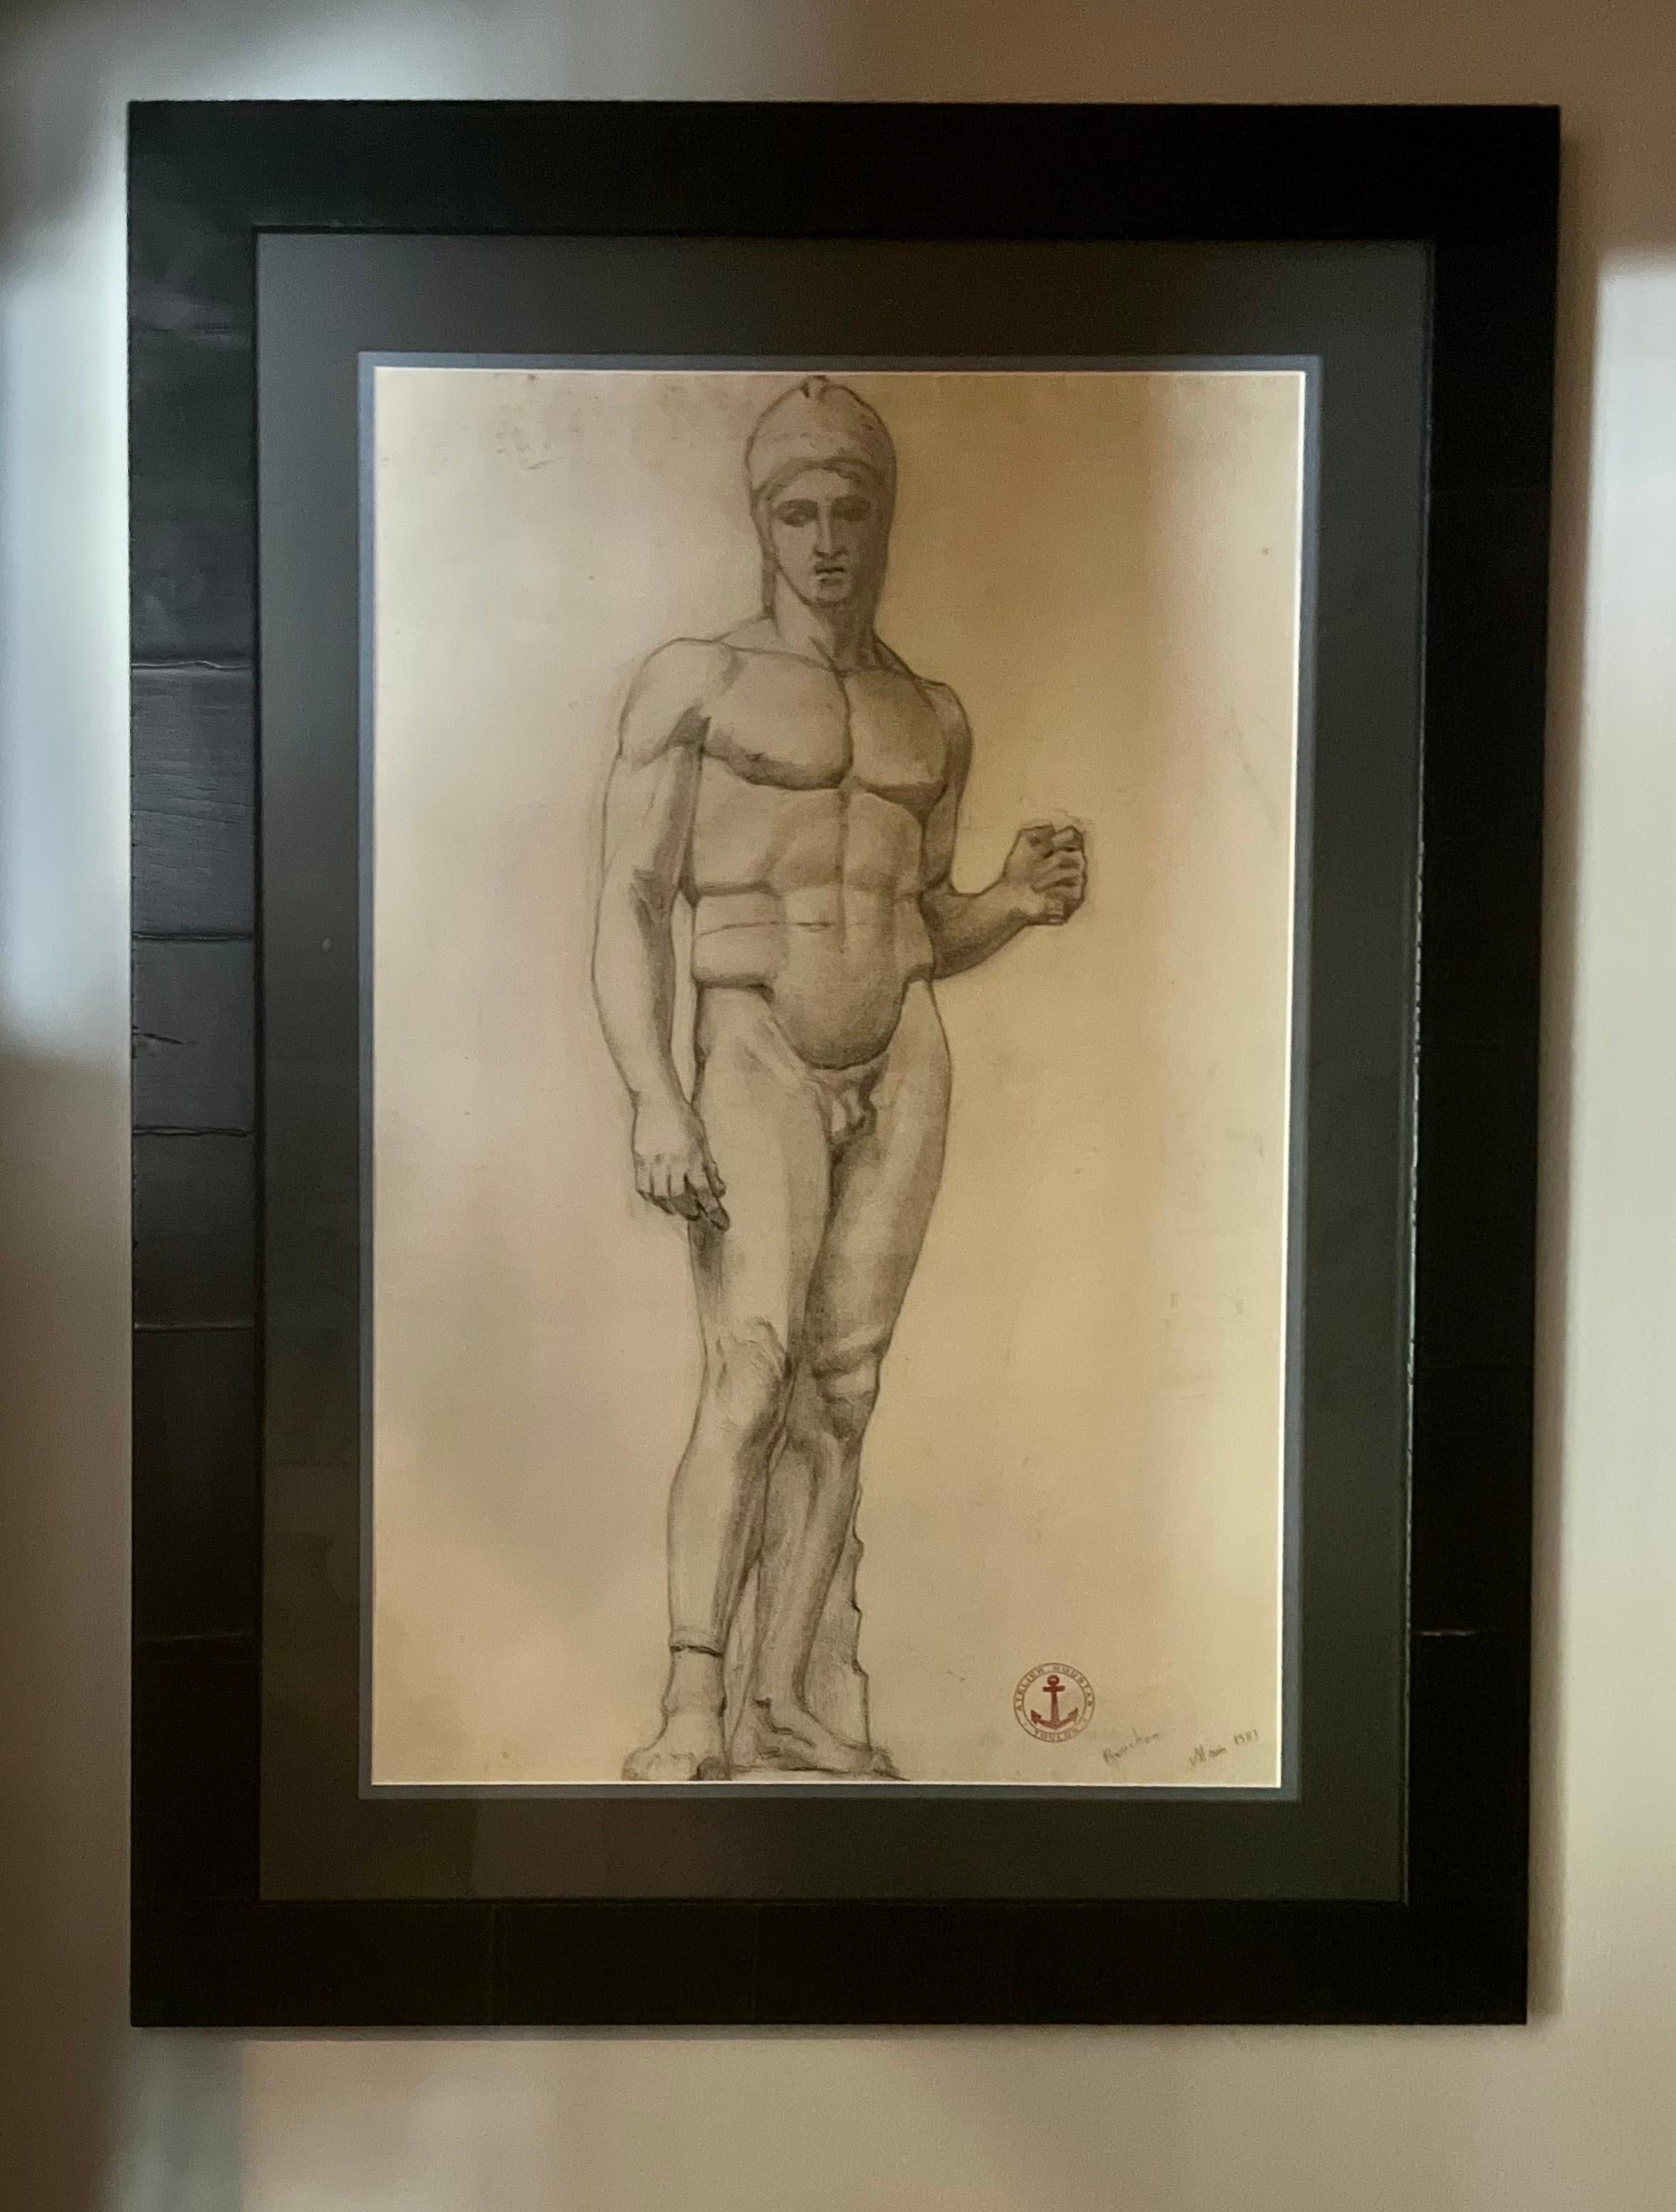 Signed 1903 academic charcoal drawing of standing nude male figure in the classical tradition of the French Academy. Mounted in a custom ebonized wood frame, the image has a strong, forthright quality, and a beautiful treatment of line and